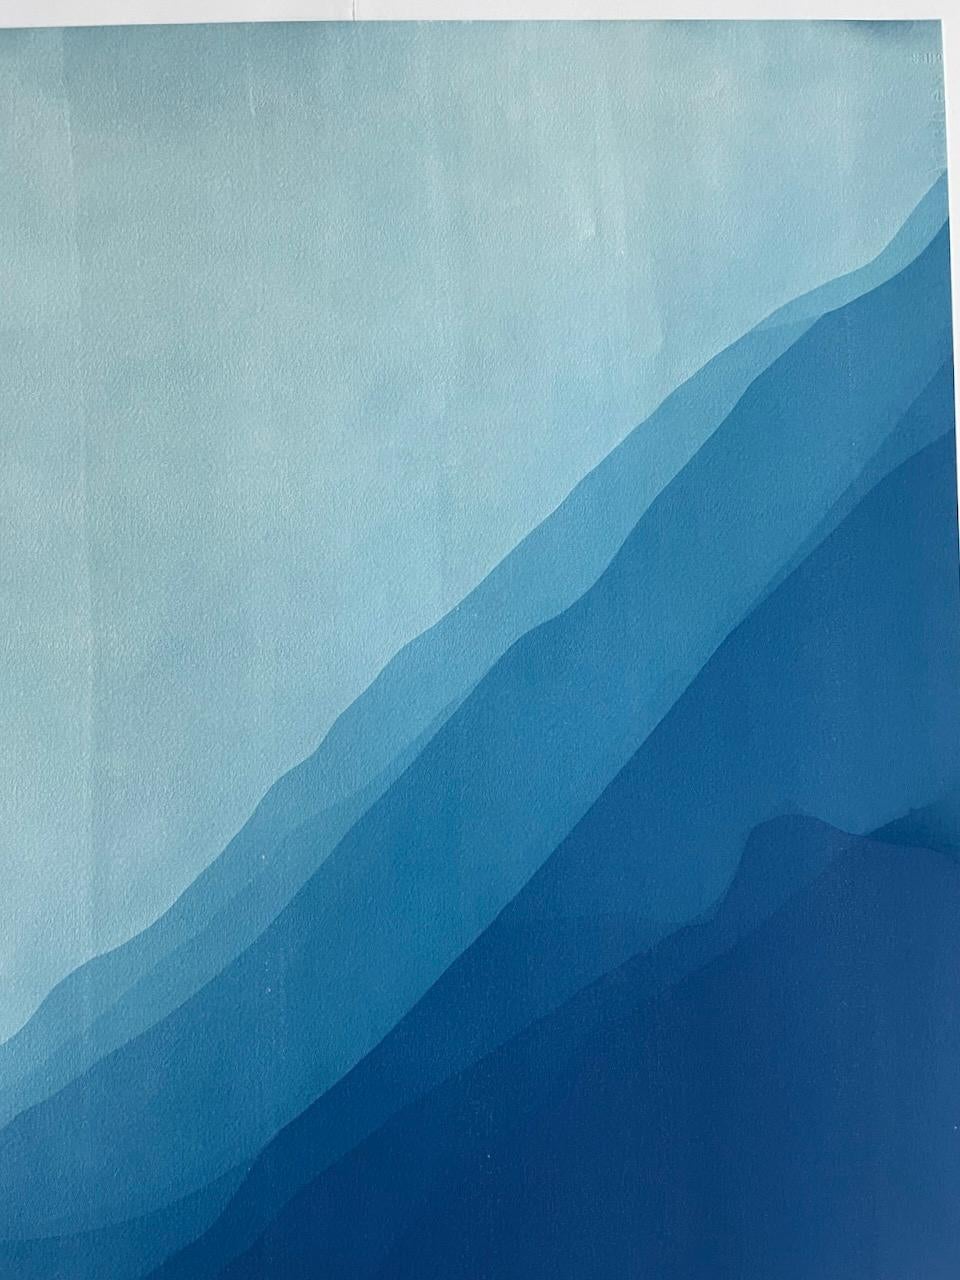 Though it resembles a giant abstract watercolor painting owing to its soft gradations and luminous quality, this is a form of photography called a cyanotype, photogram or sun print. This is a multiple-exposure lensless photograph or abstract